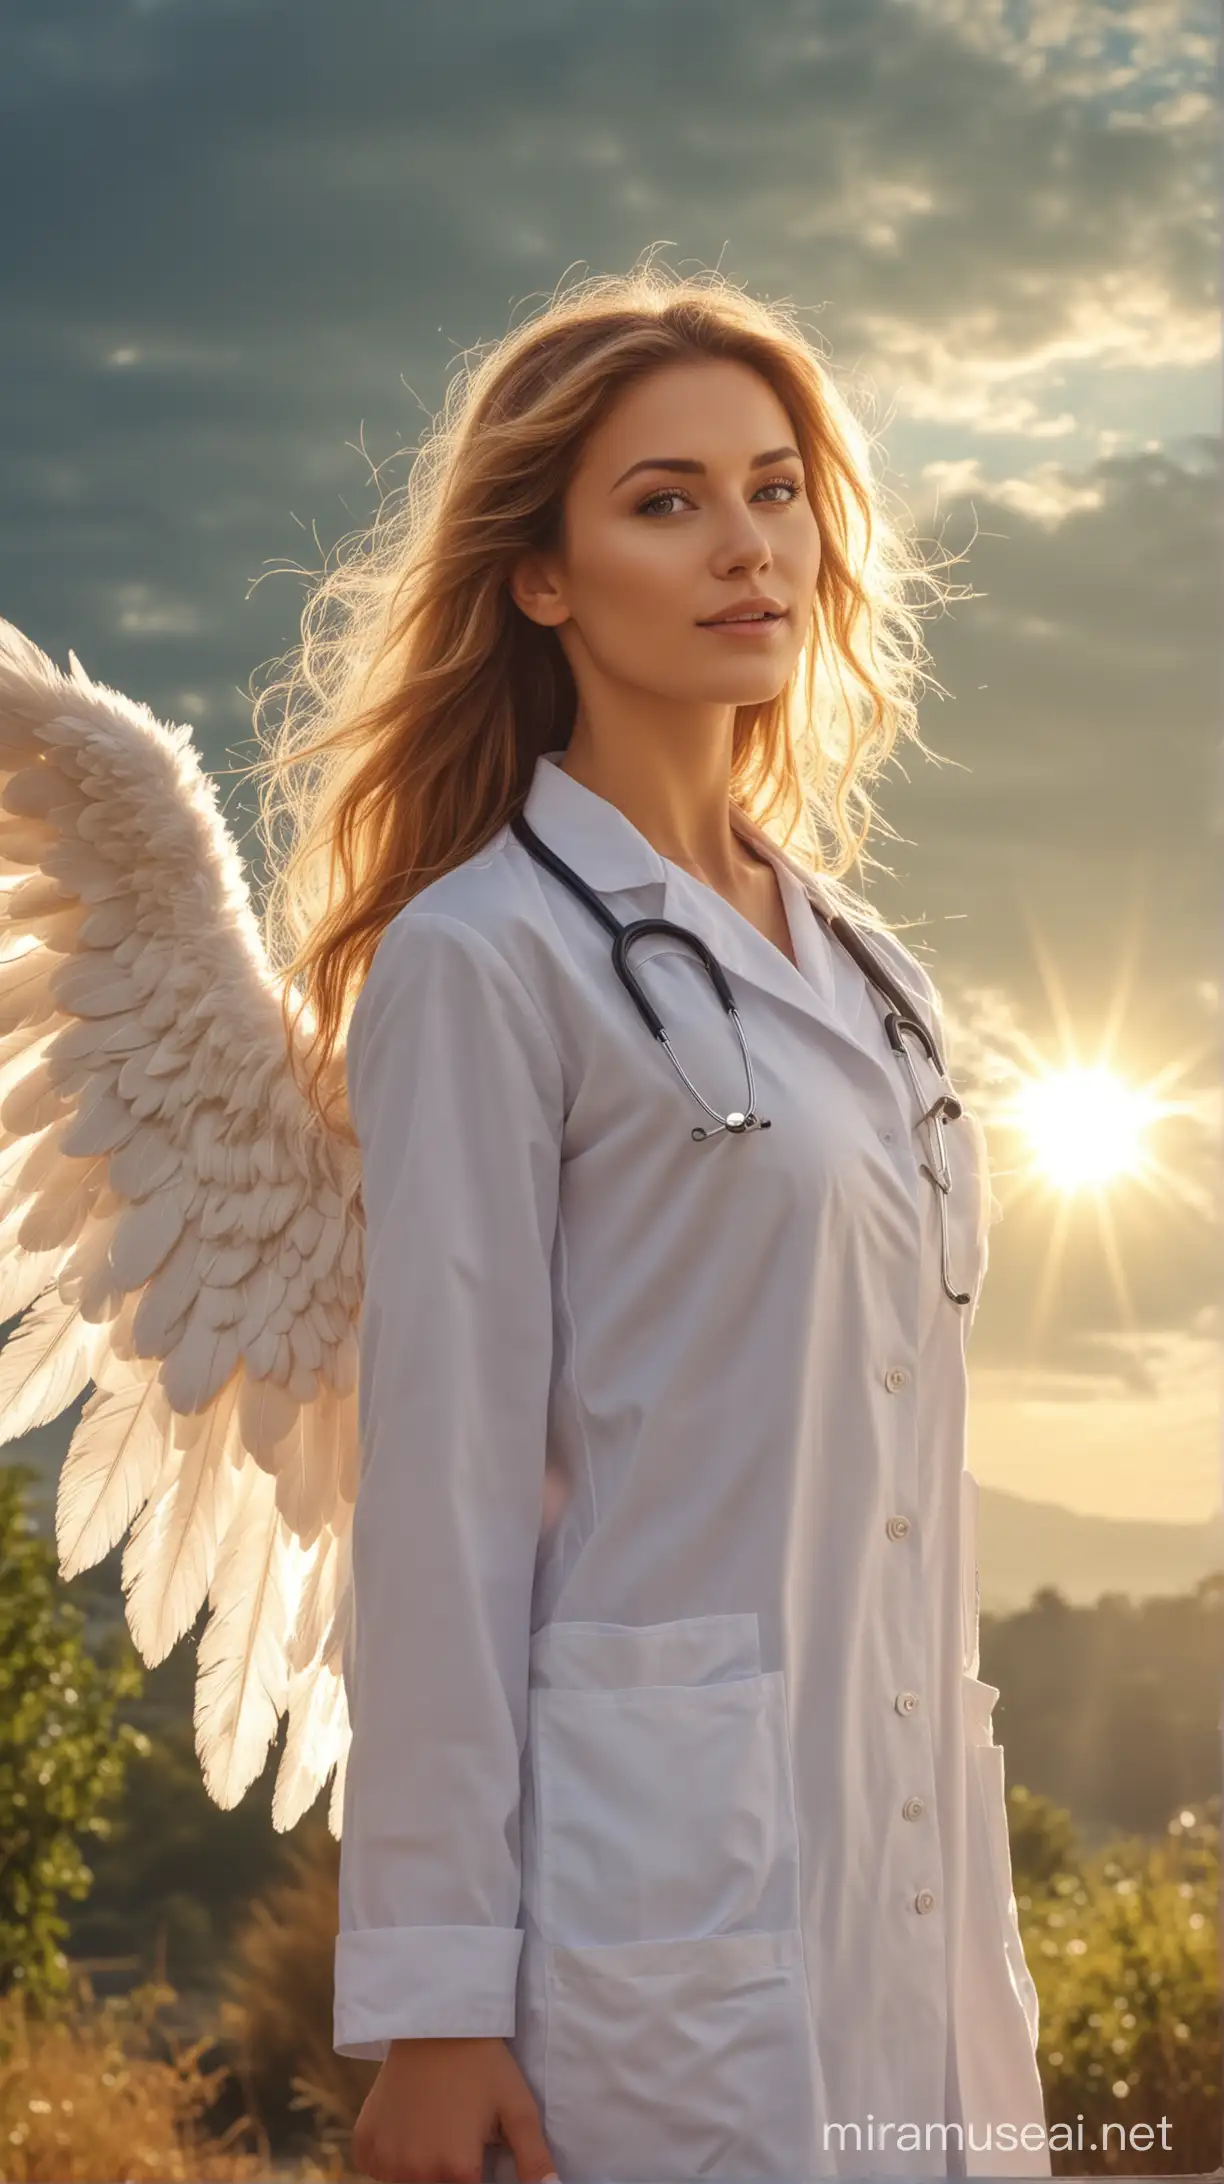 Angelic Women Doctors Providing Care in Serene Natural Setting with Sunlight Effects 4K HDR Image